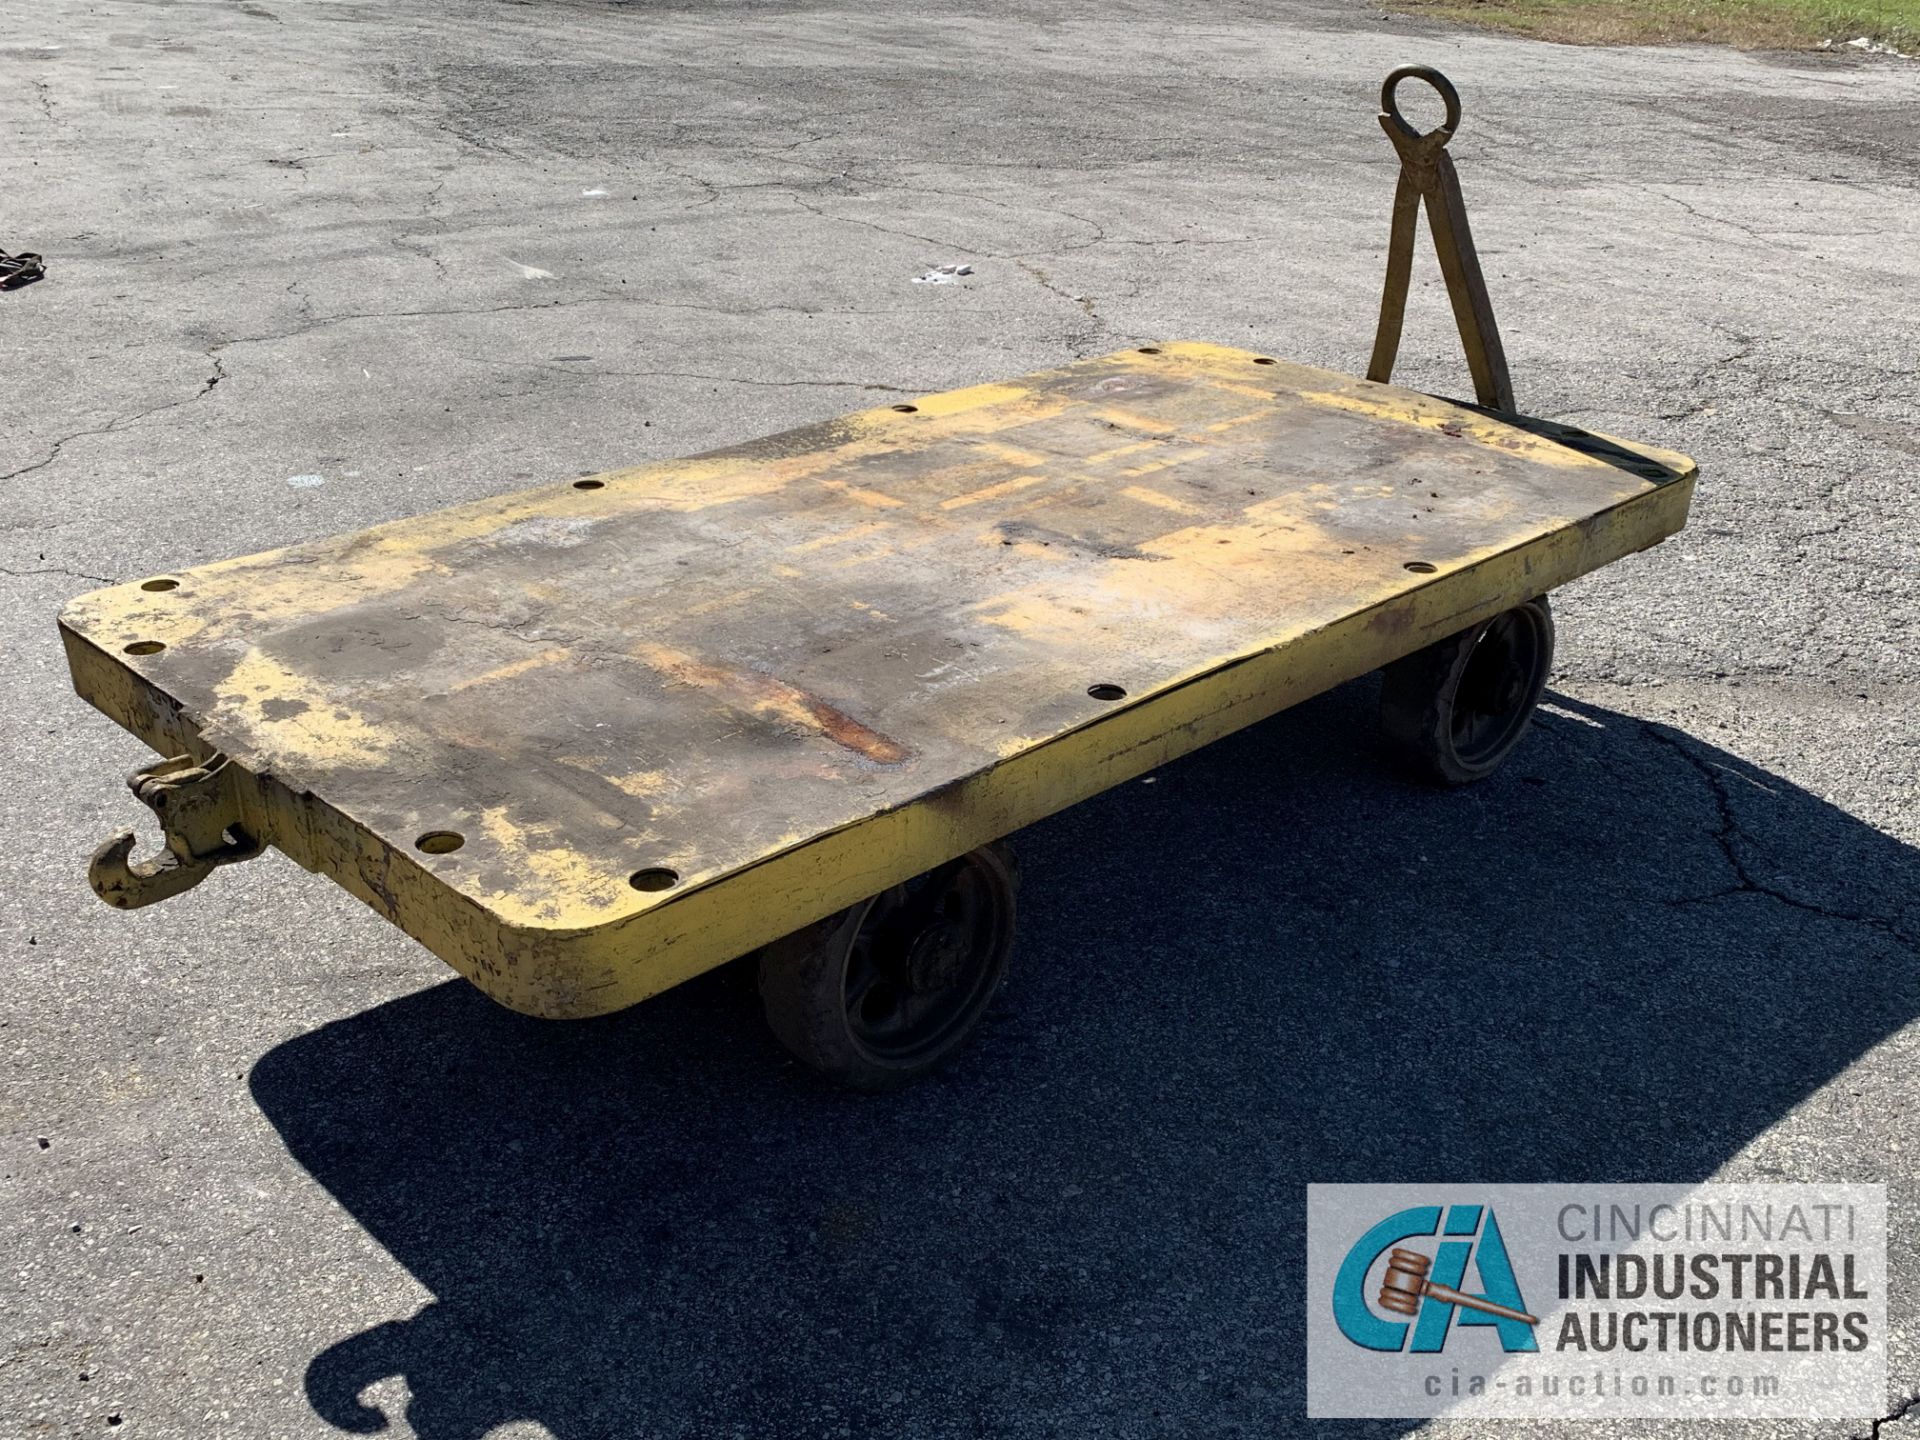 48" X 96" LOW PROFILE HEAVY DUTY STEEL TRANSFER CART - $20.00 Rigging Fee Due to Onsite Rigger - - Image 2 of 2